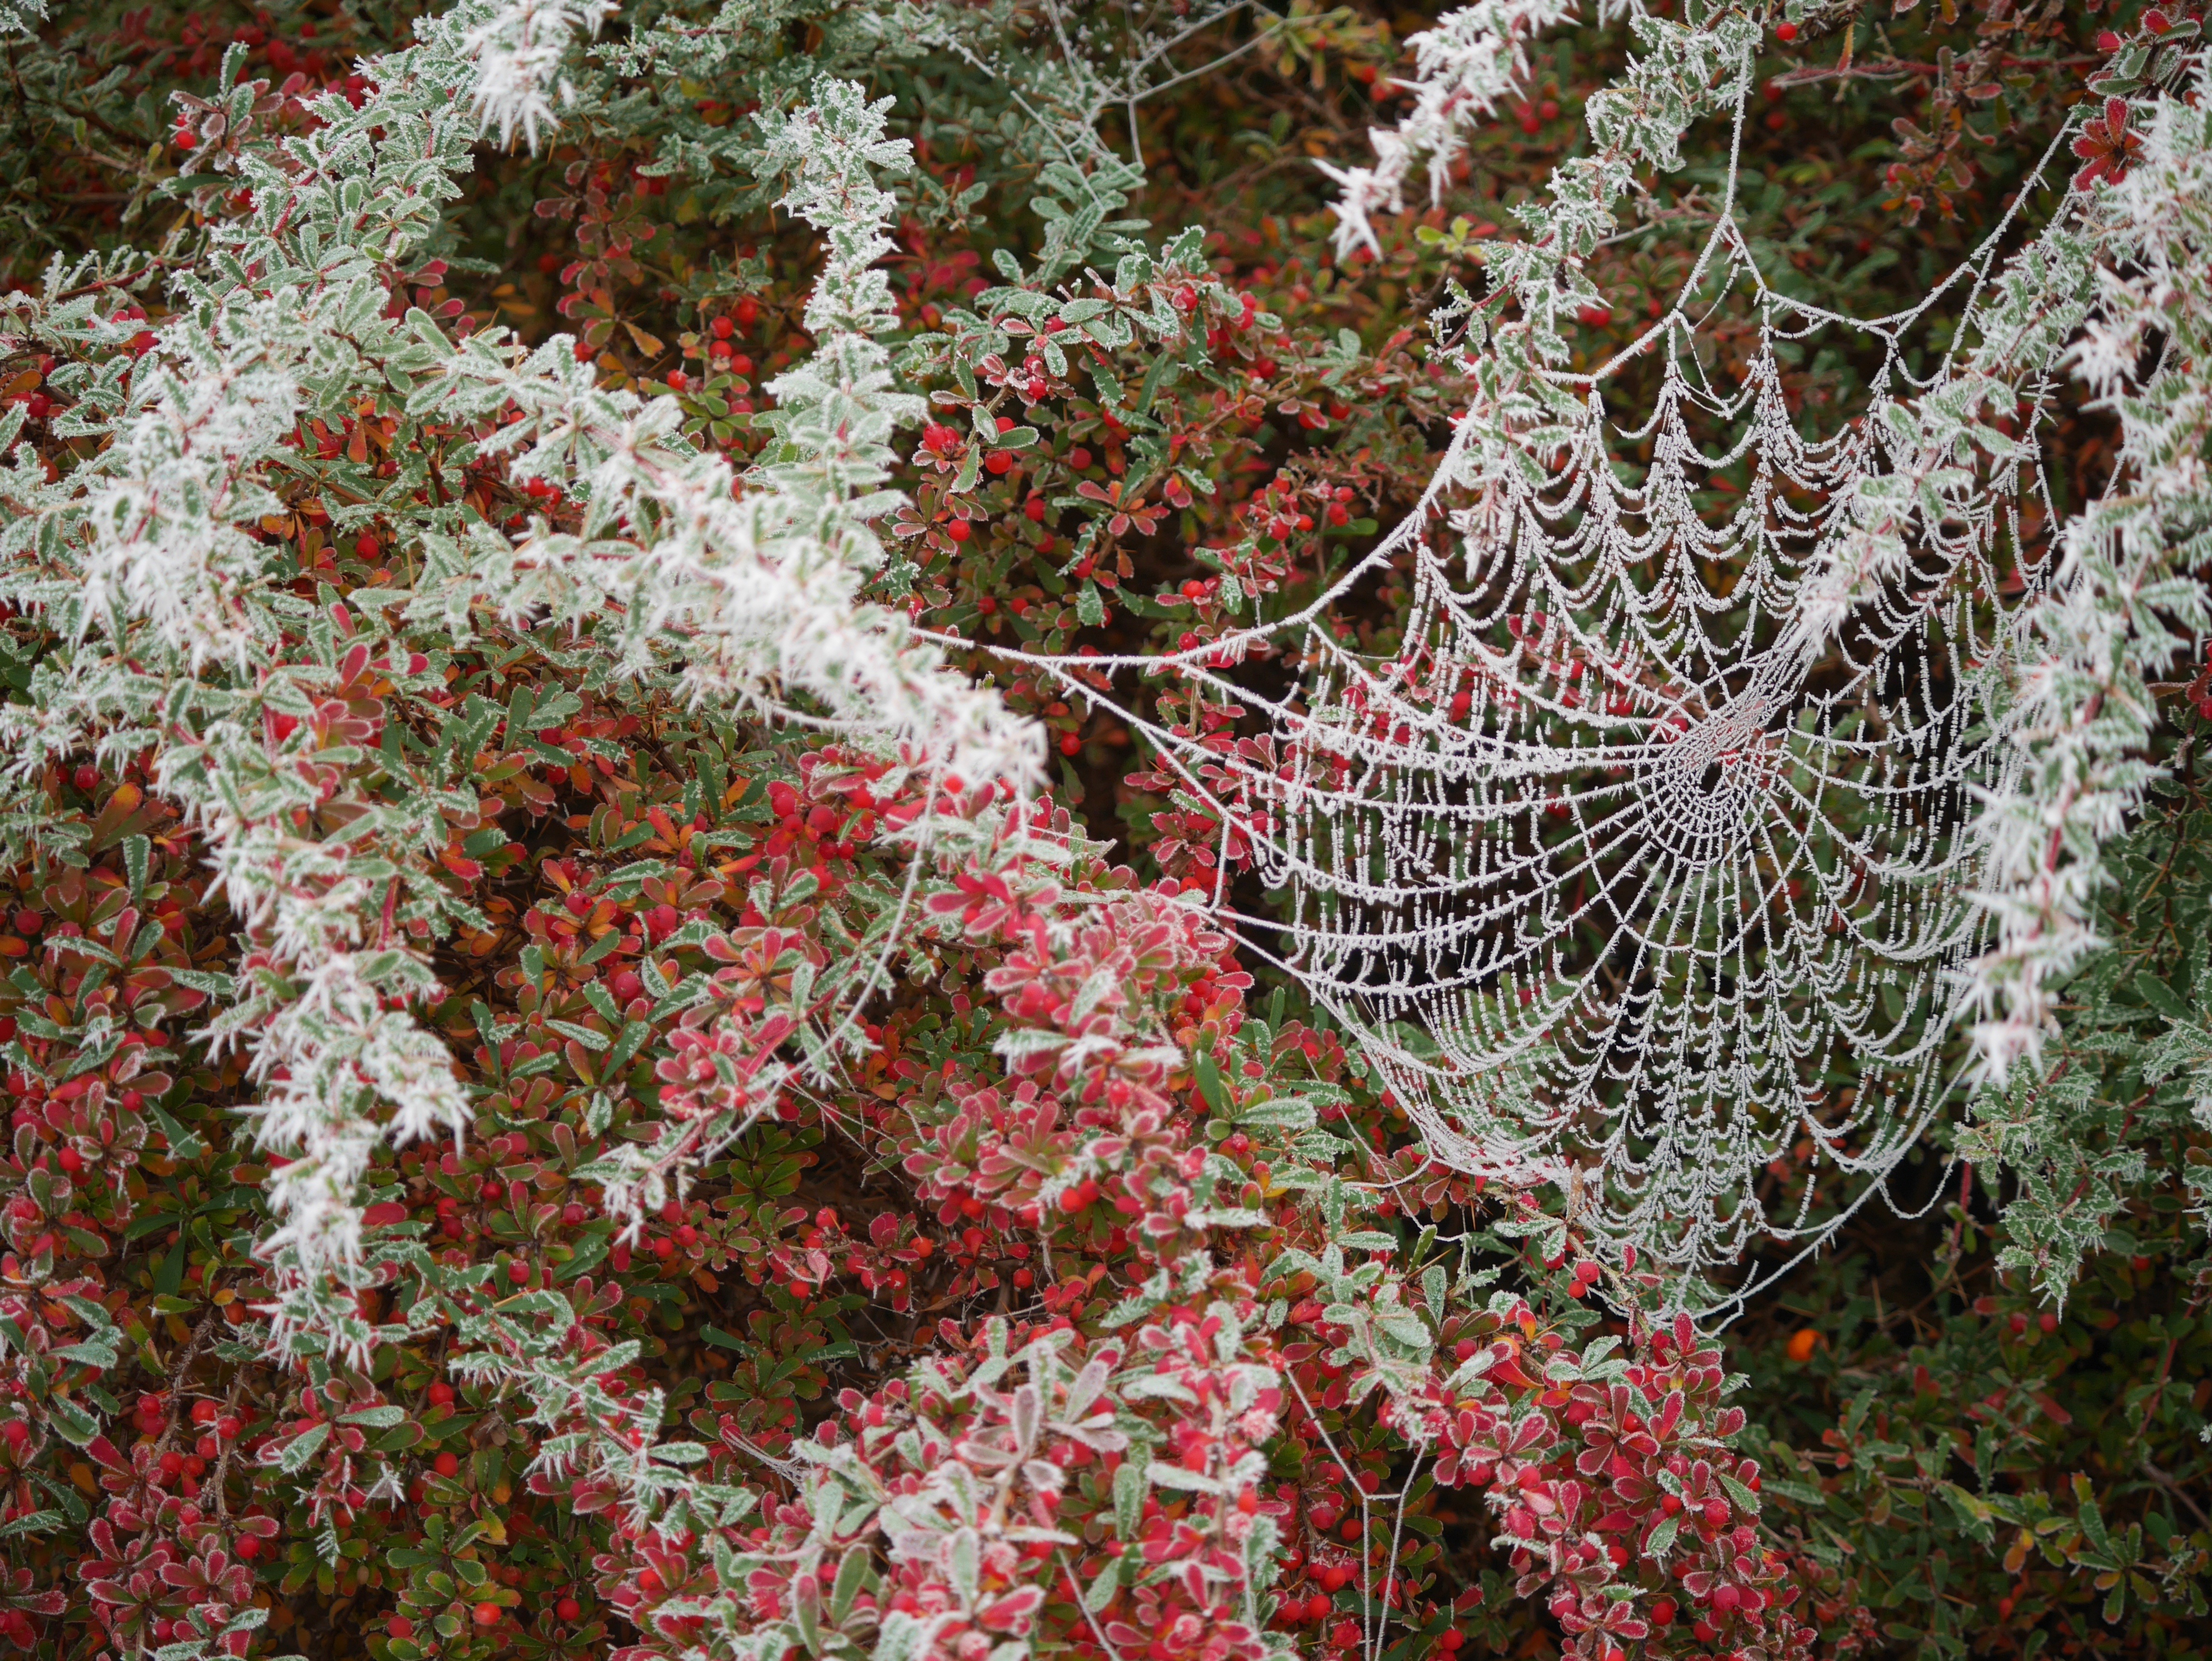 Frost Nature Spider Web 4592x3448